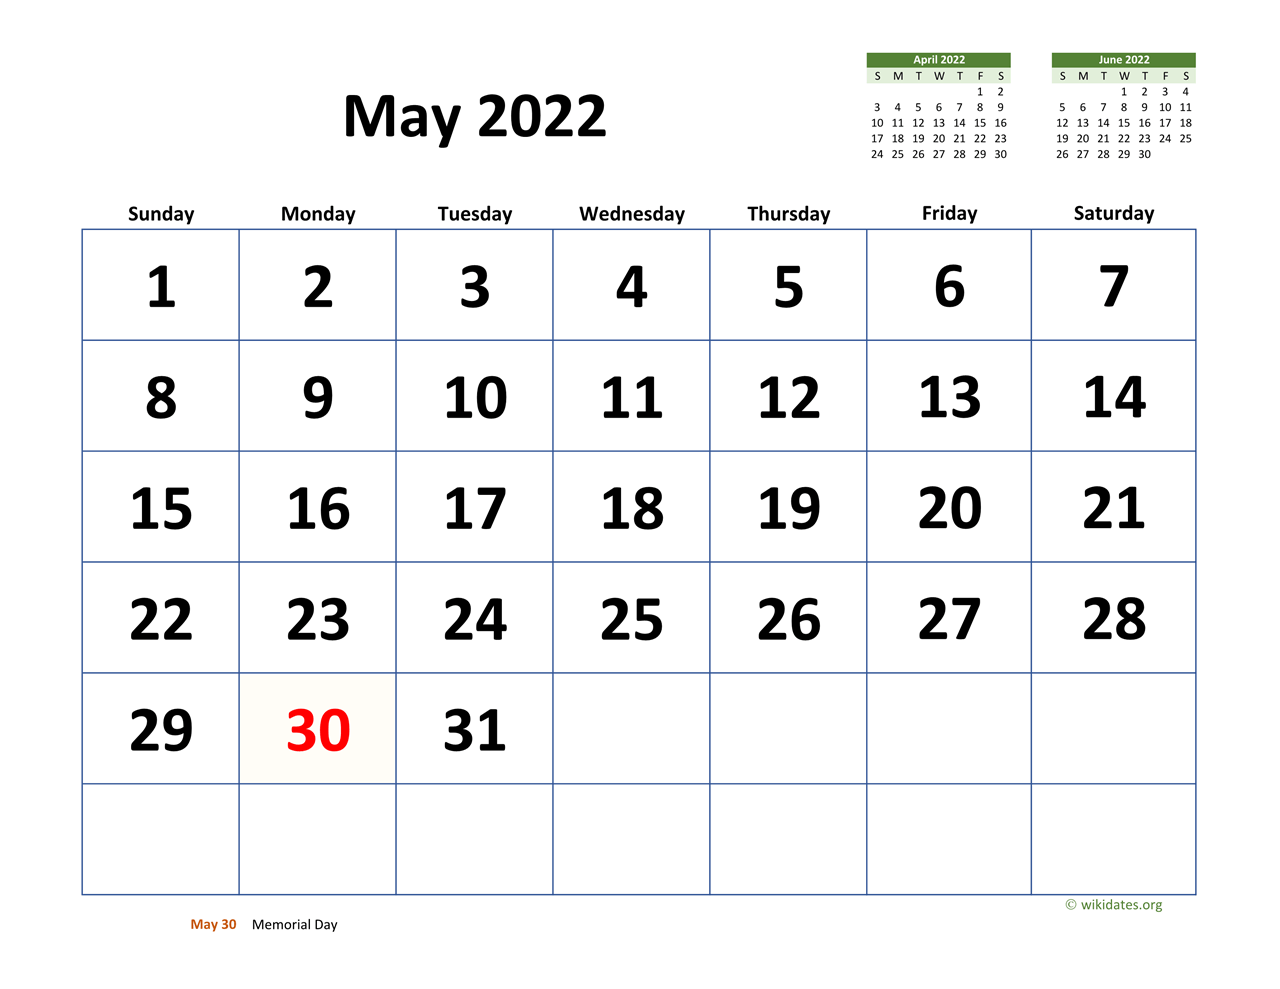 May 2022 Calendar May 2022 Calendar With Extra-Large Dates | Wikidates.org